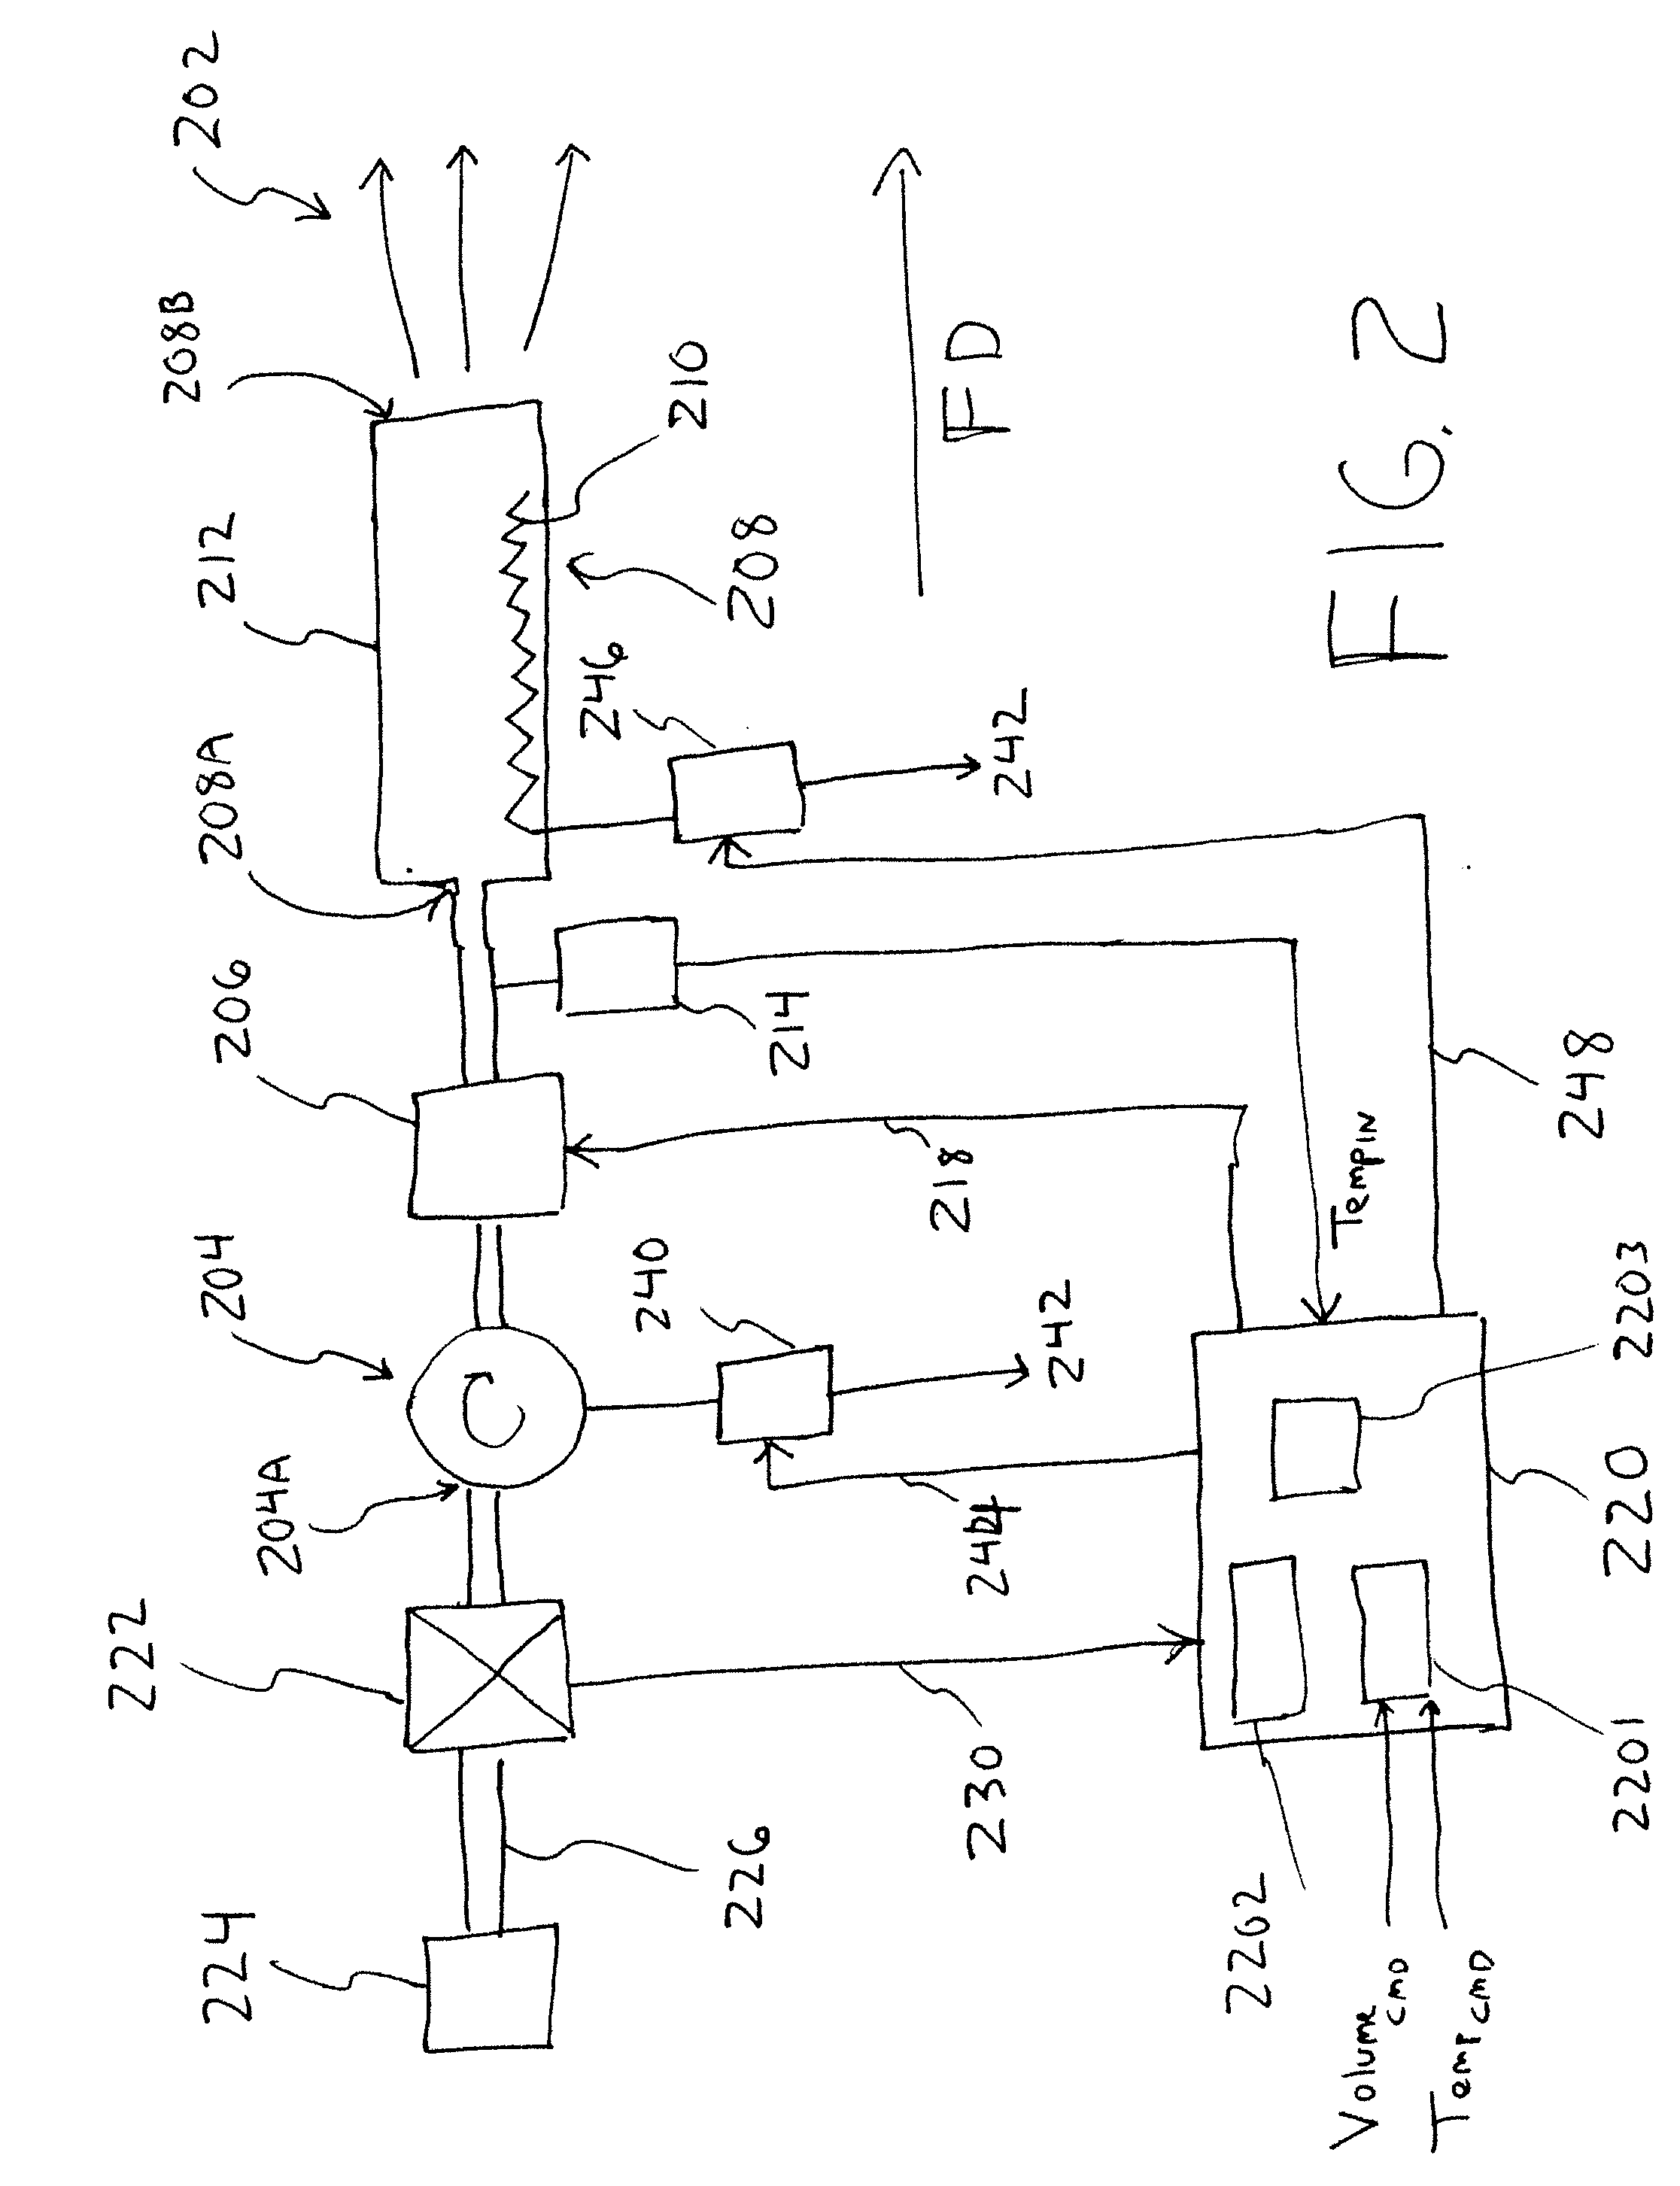 Method and apparatus for forced air heater measurement and control